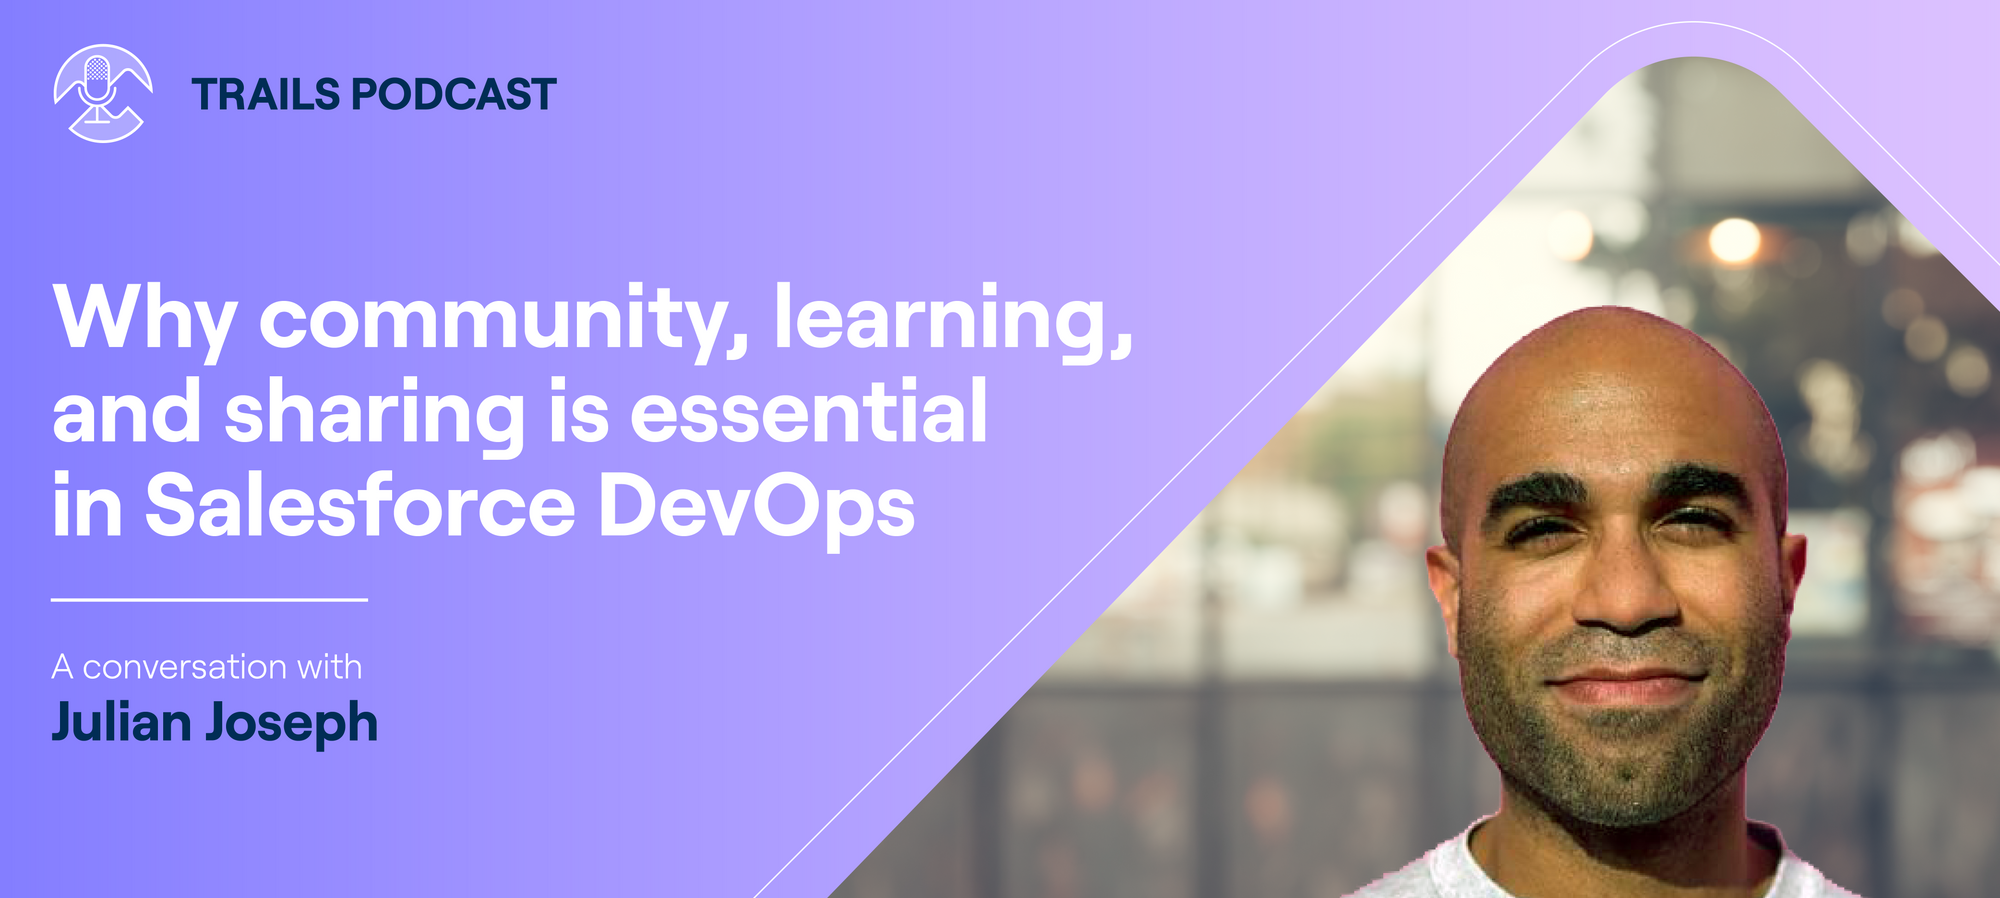 Why community, learning, and sharing is essential in Salesforce DevOps (Trails Podcast episode #12 with Julian Joseph)